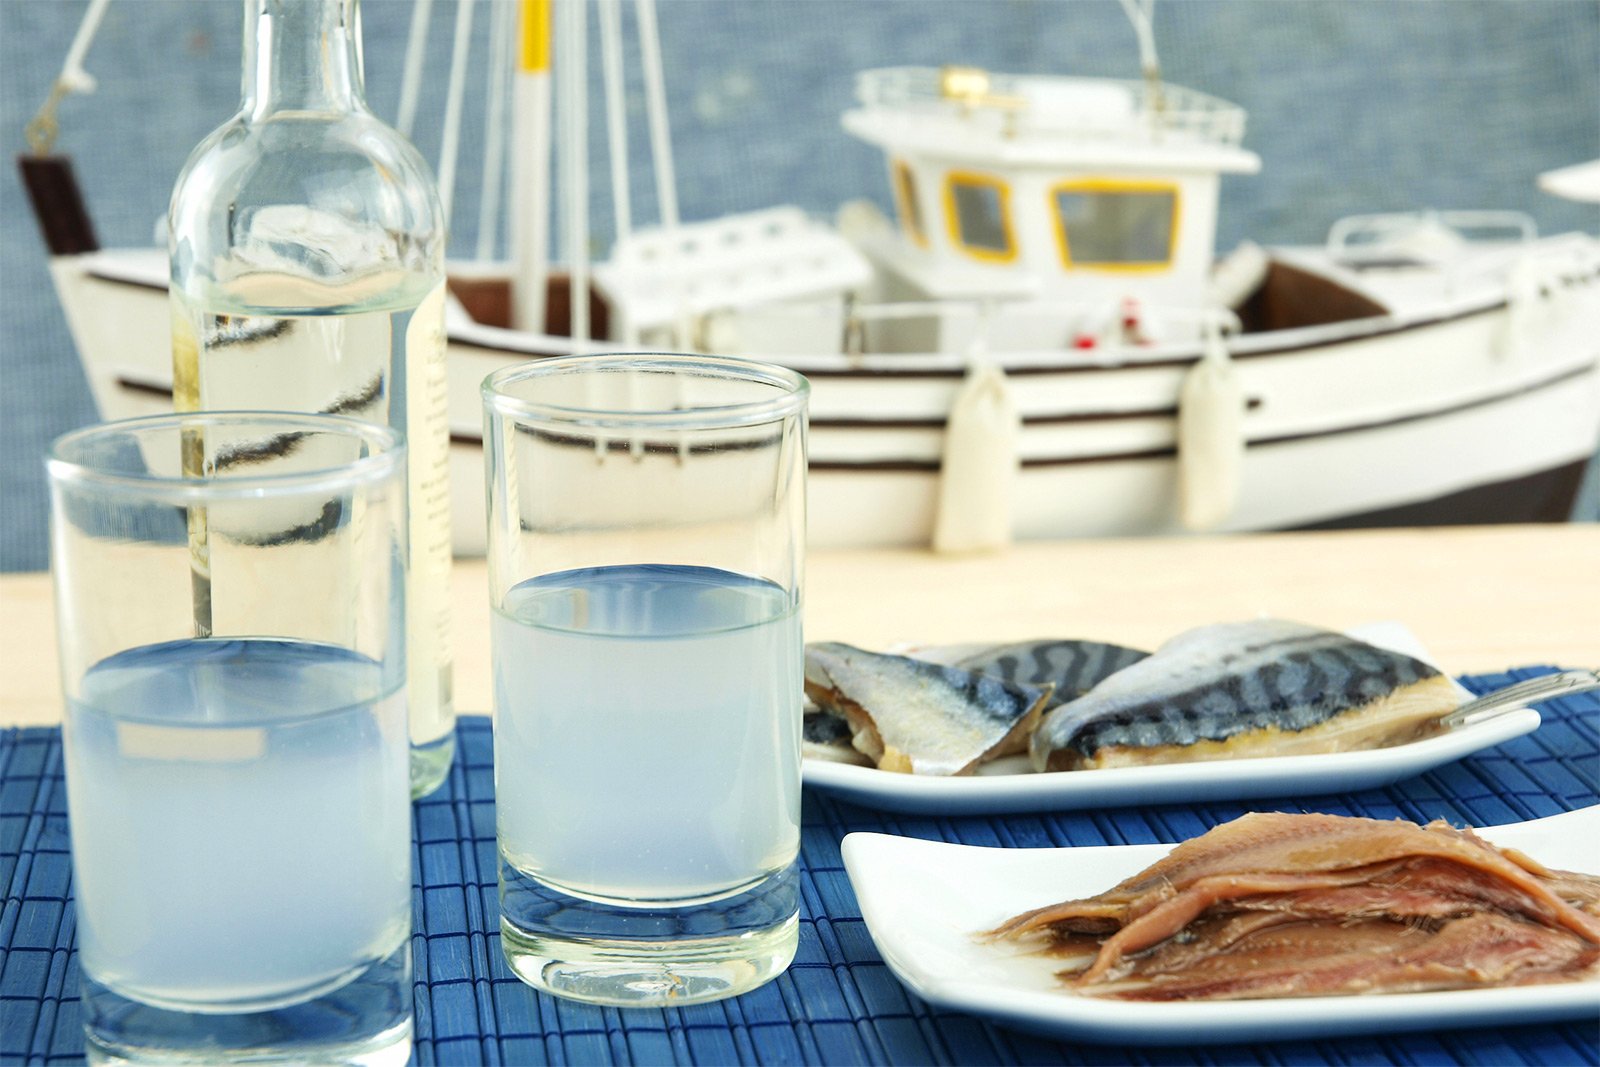 How to try Ouzo on Crete